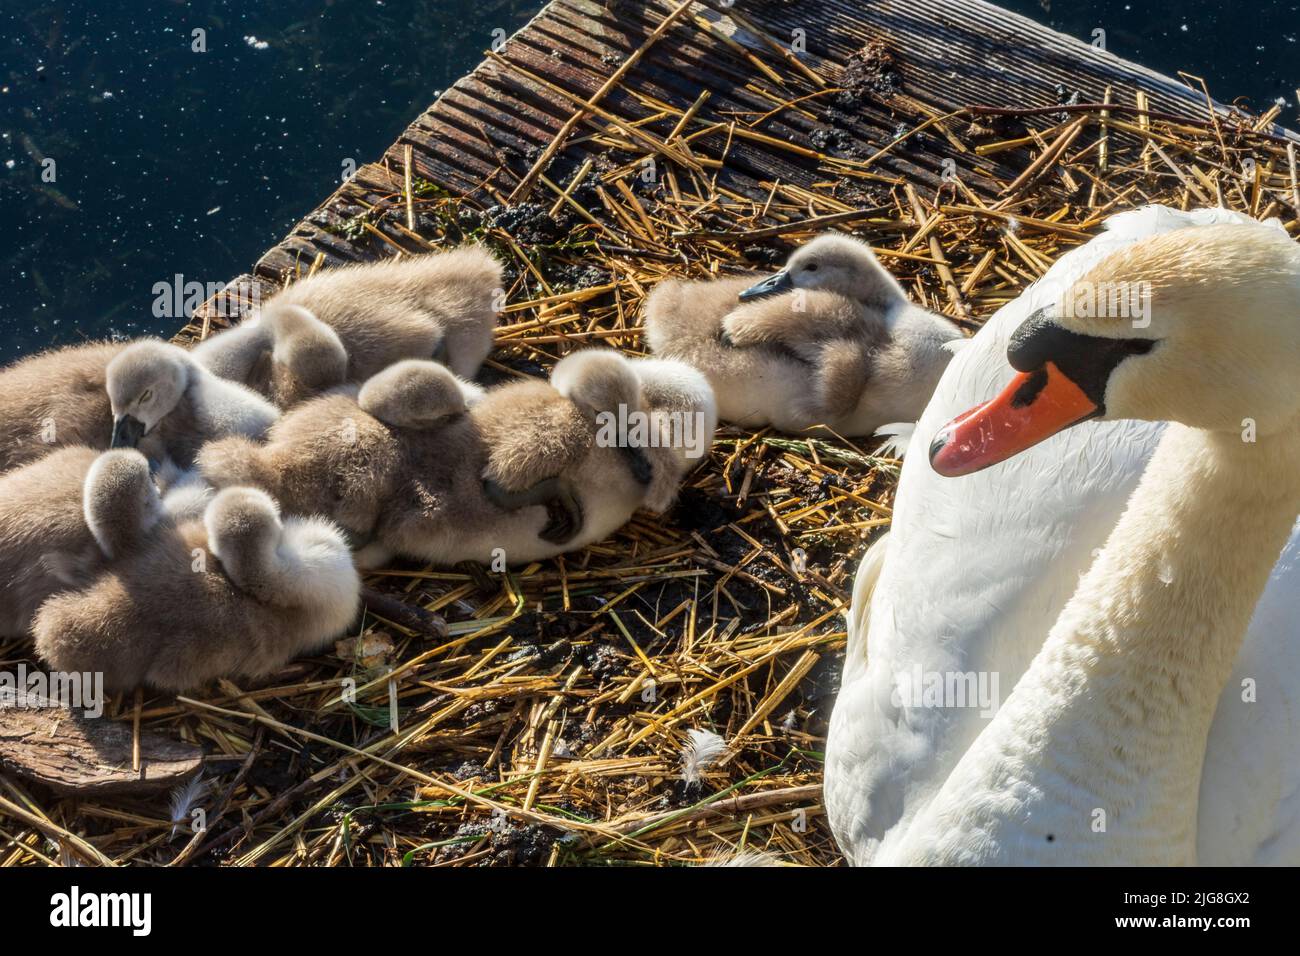 Vienna, adult mute swan (Cygnus olor) with chicks on floating nest in 22. district Donaustadt, Wien, Austria Stock Photo